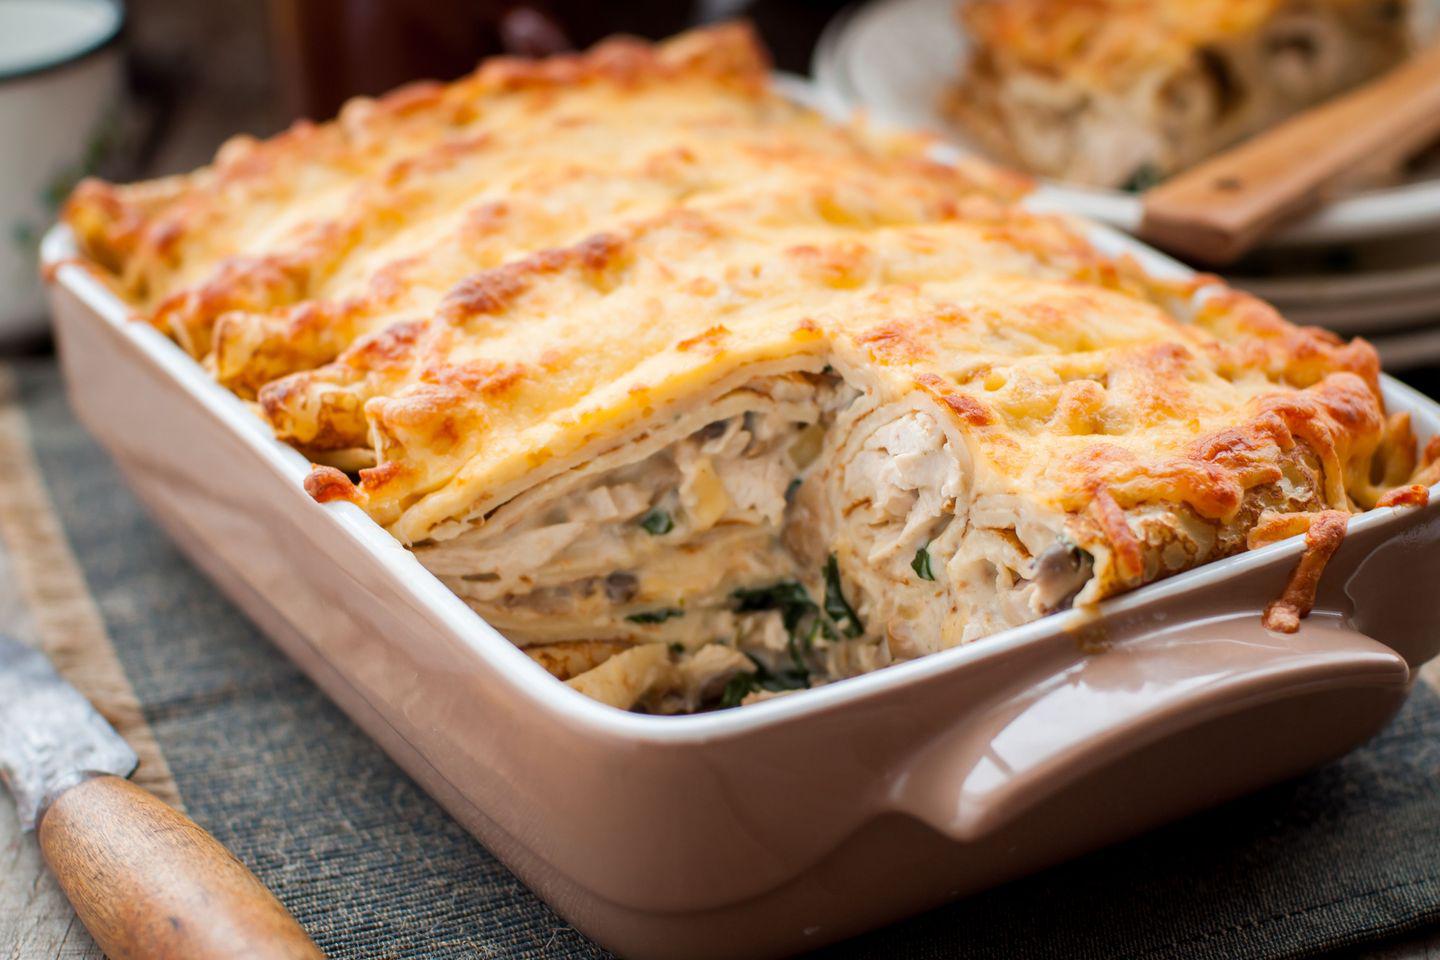 Juicy pancake casserole with chicken, mushrooms and spinach